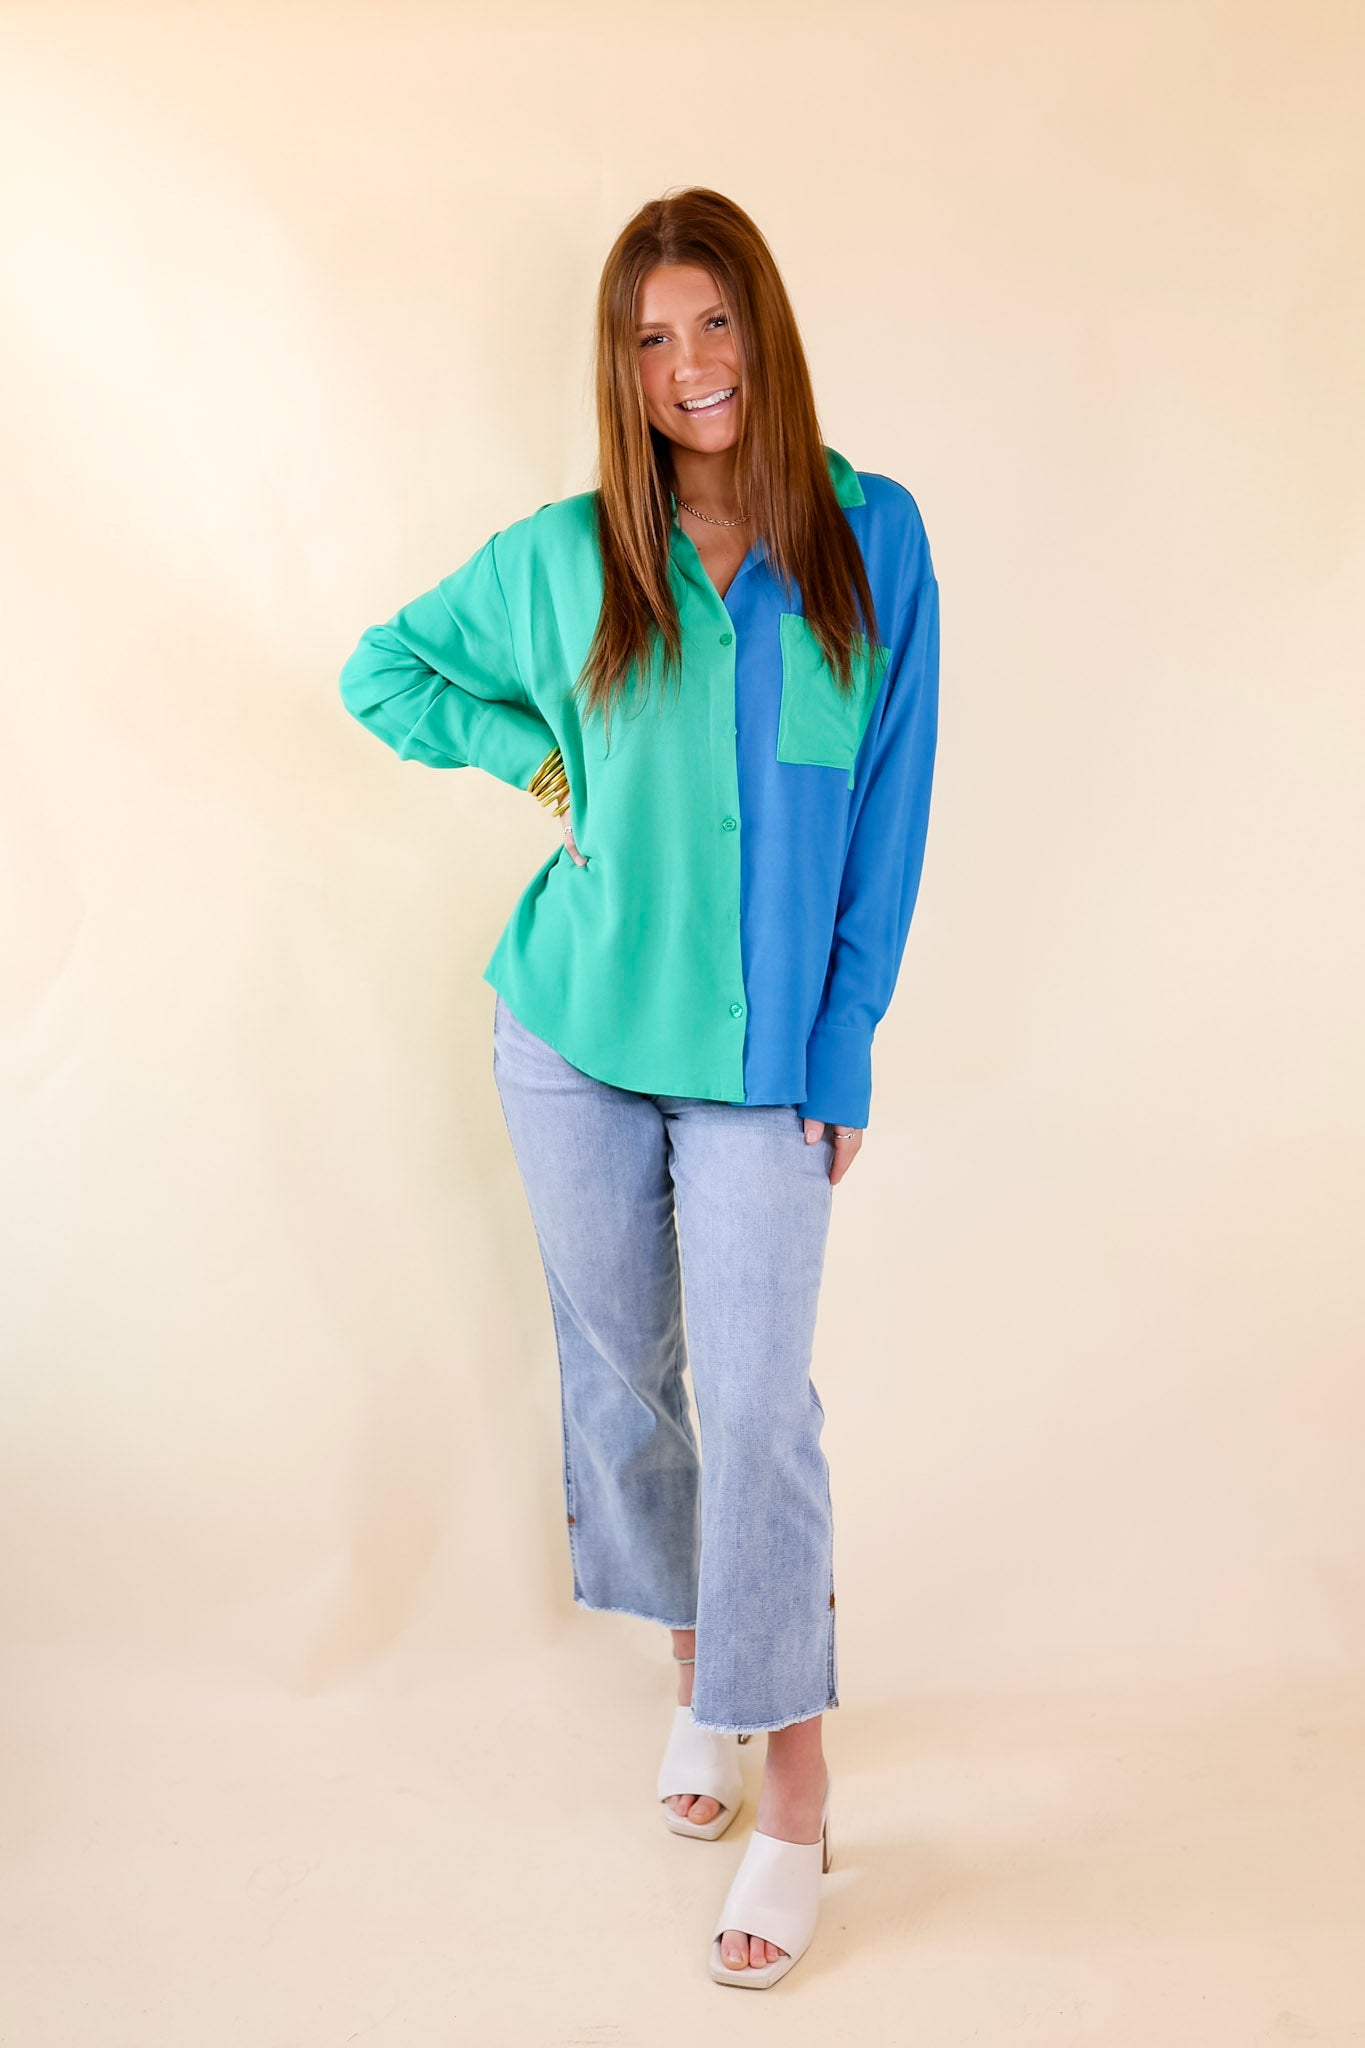 Play It Up Color Block Button Up Top in Blue and Green - Giddy Up Glamour Boutique